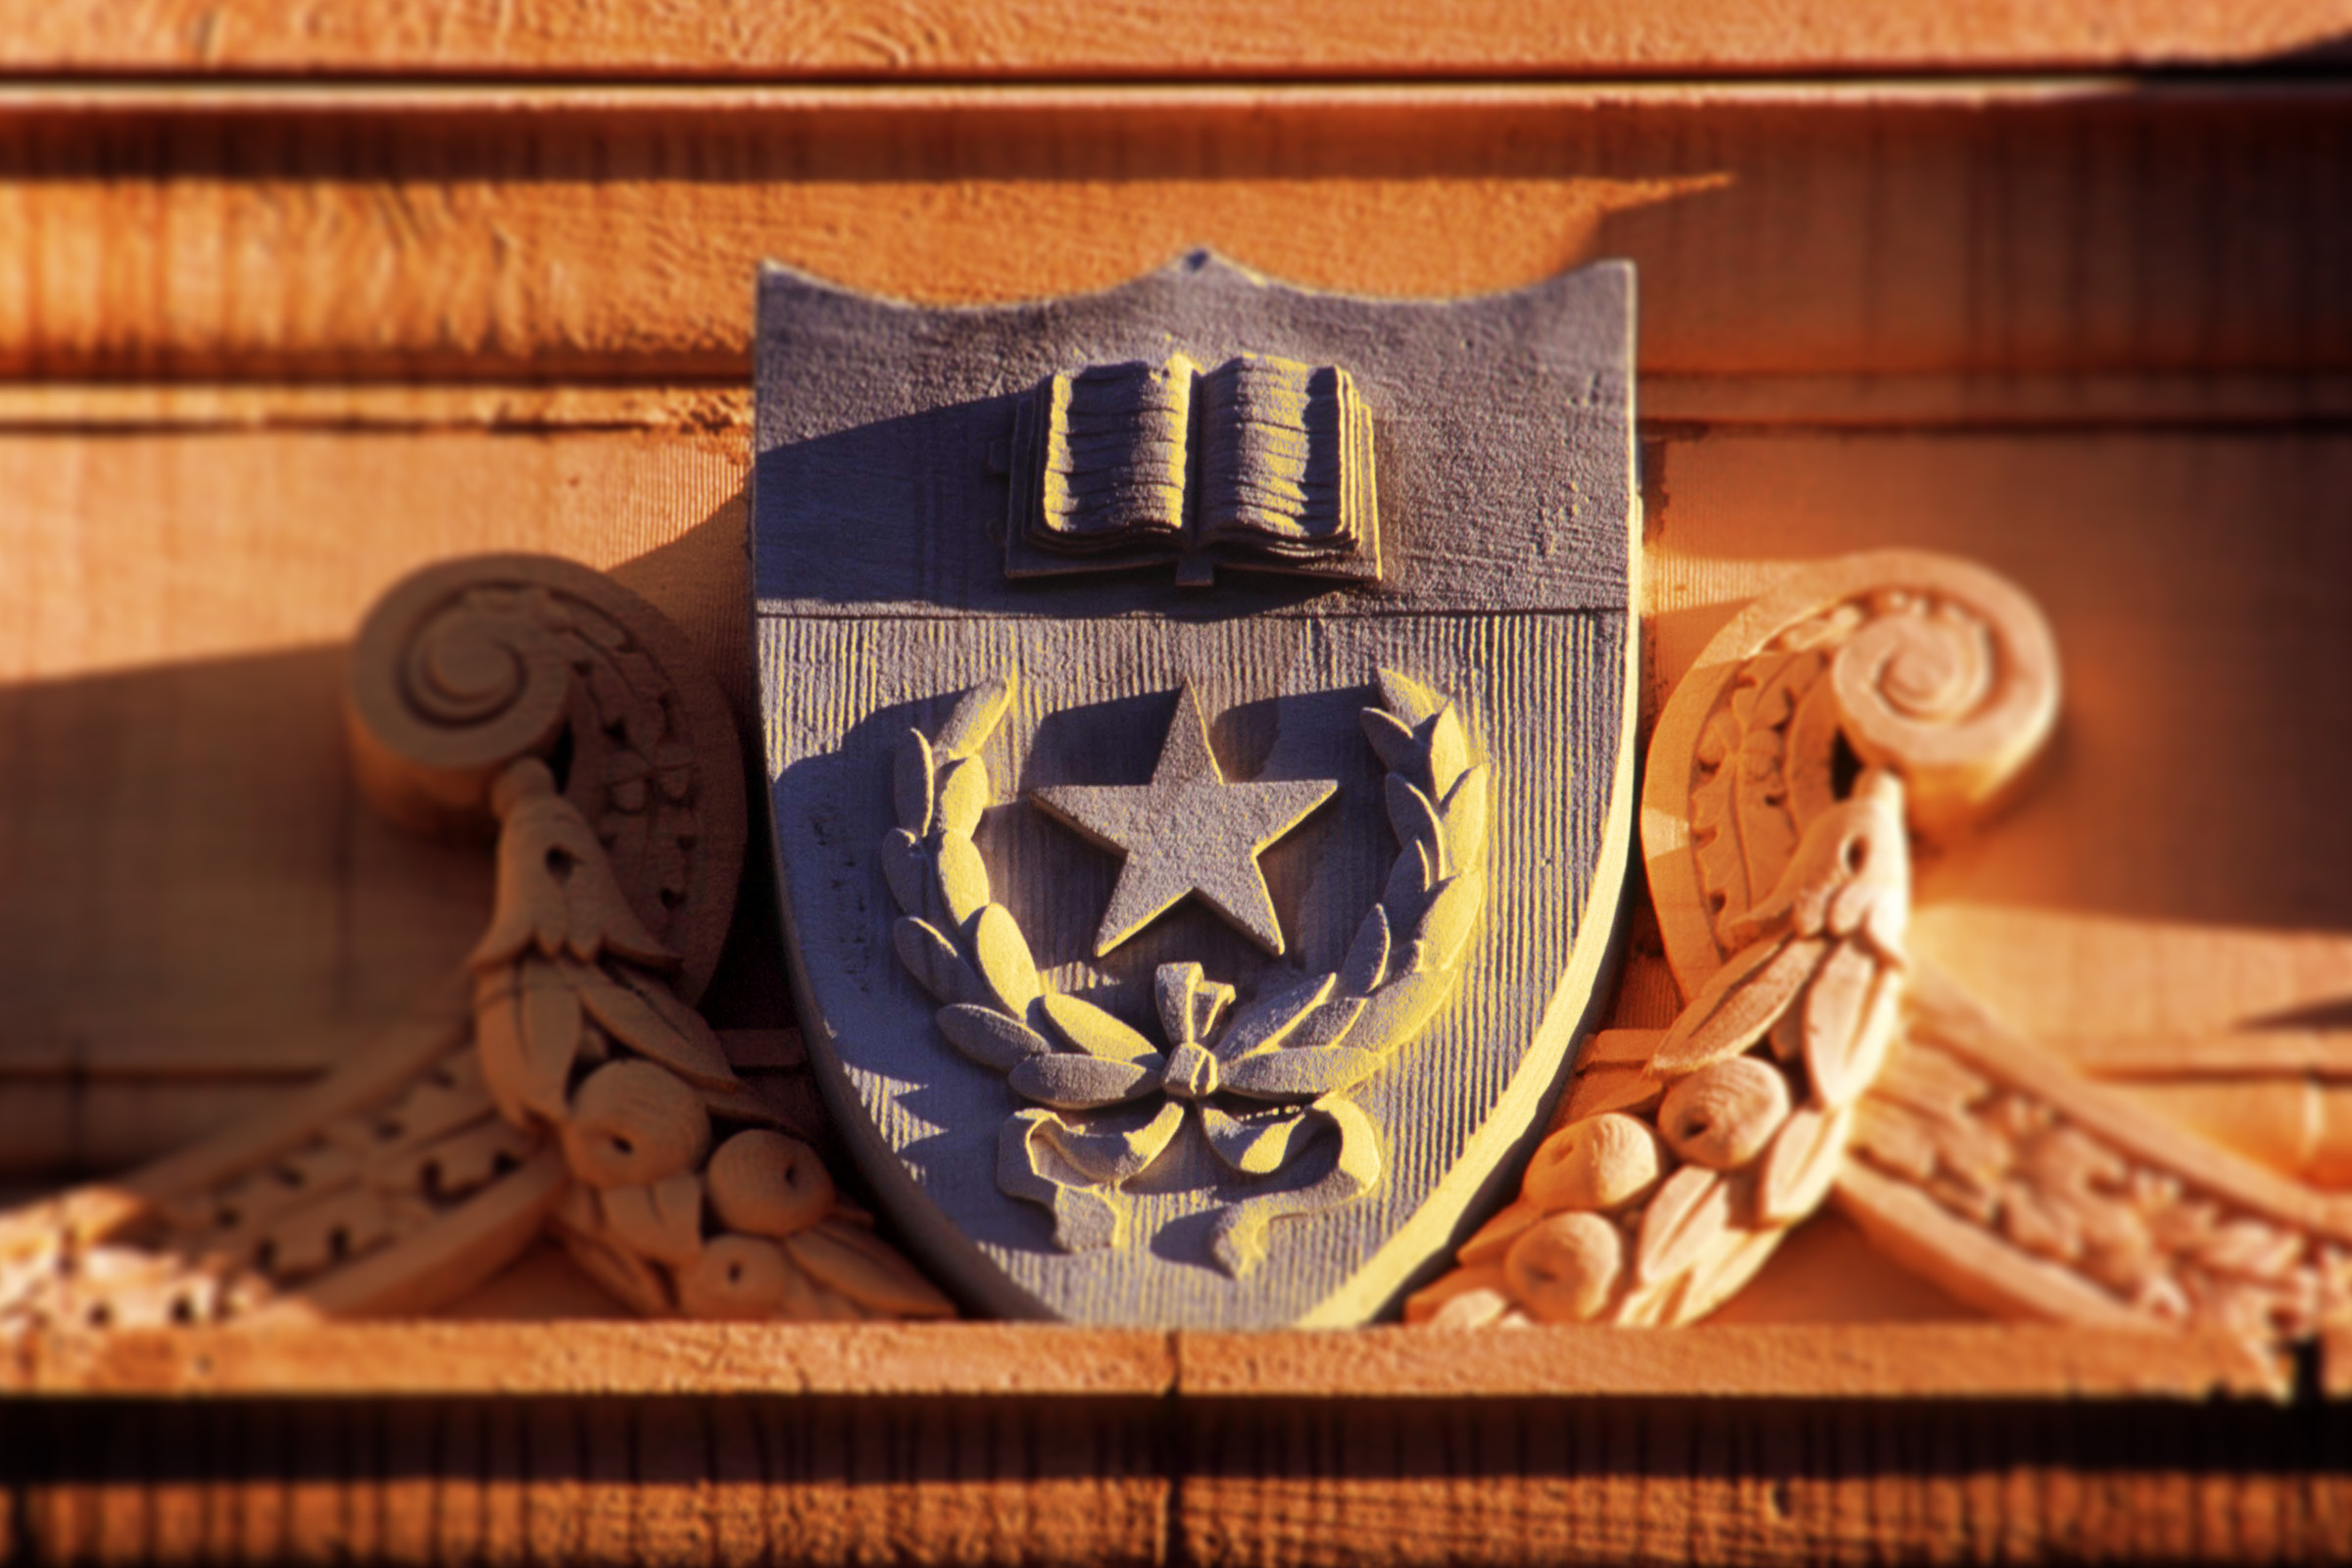 Architectural detail featuring university shield on orange tinged background